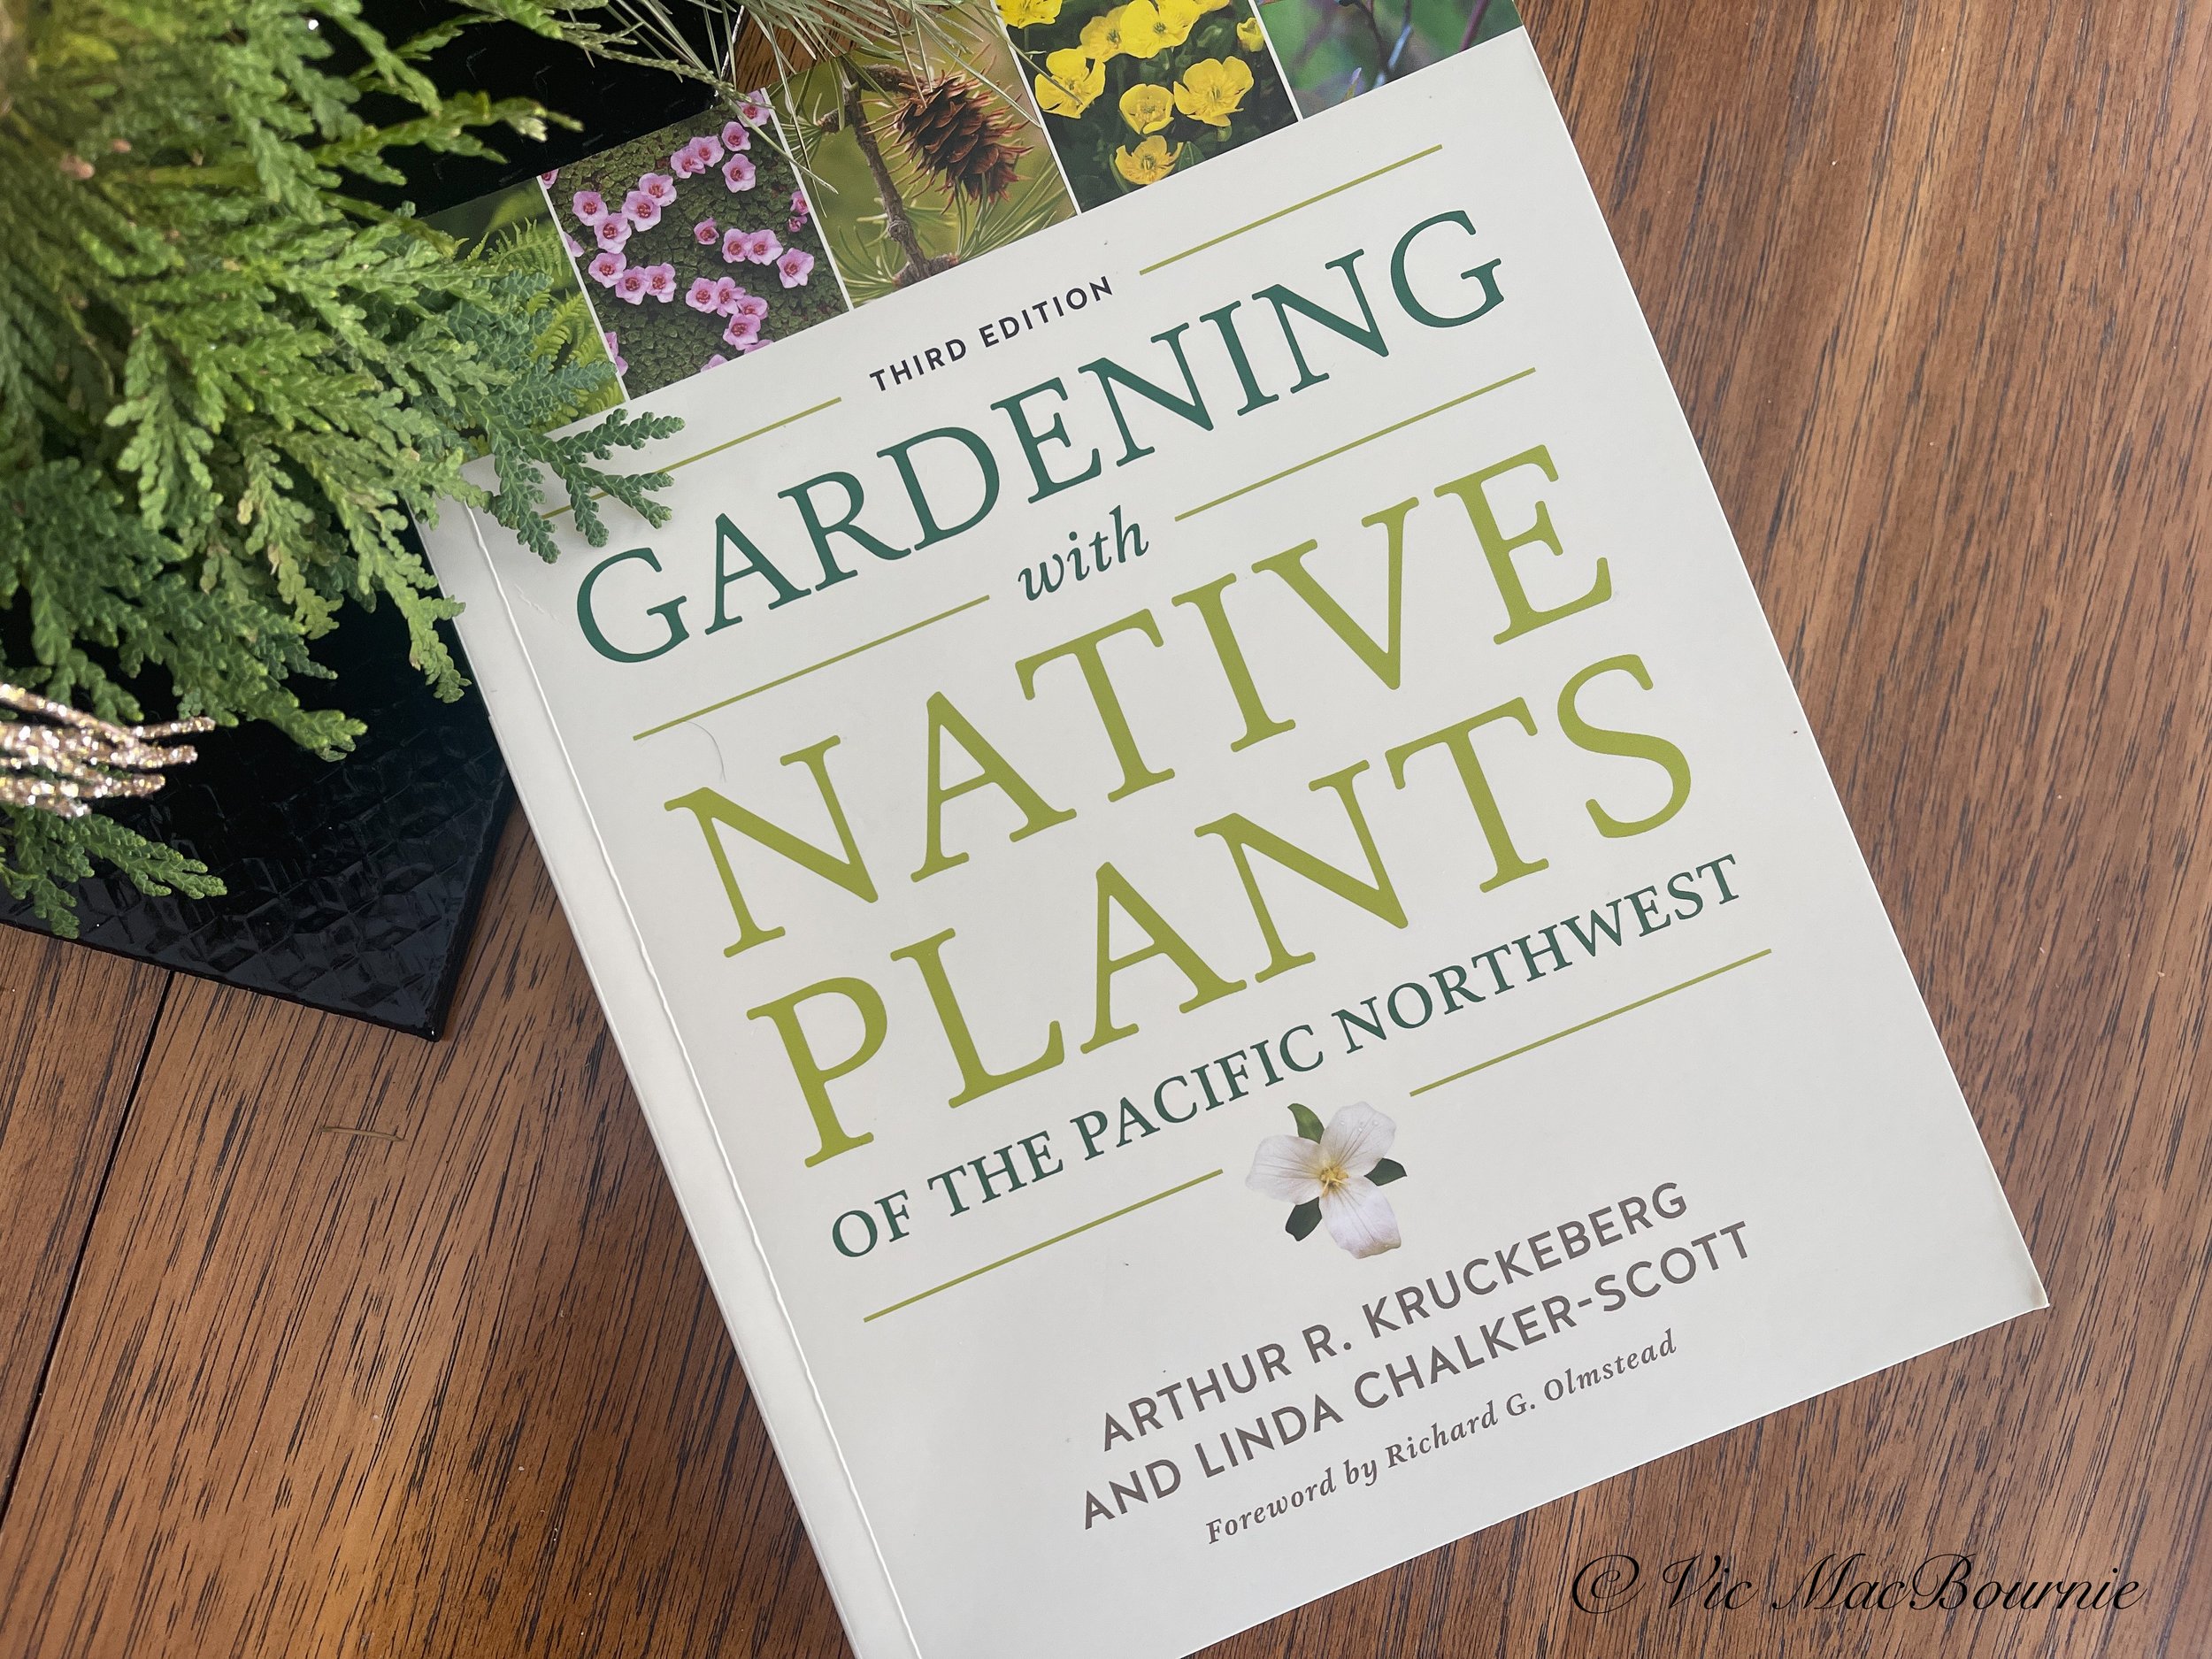 Native plants in the Pacific Northwest